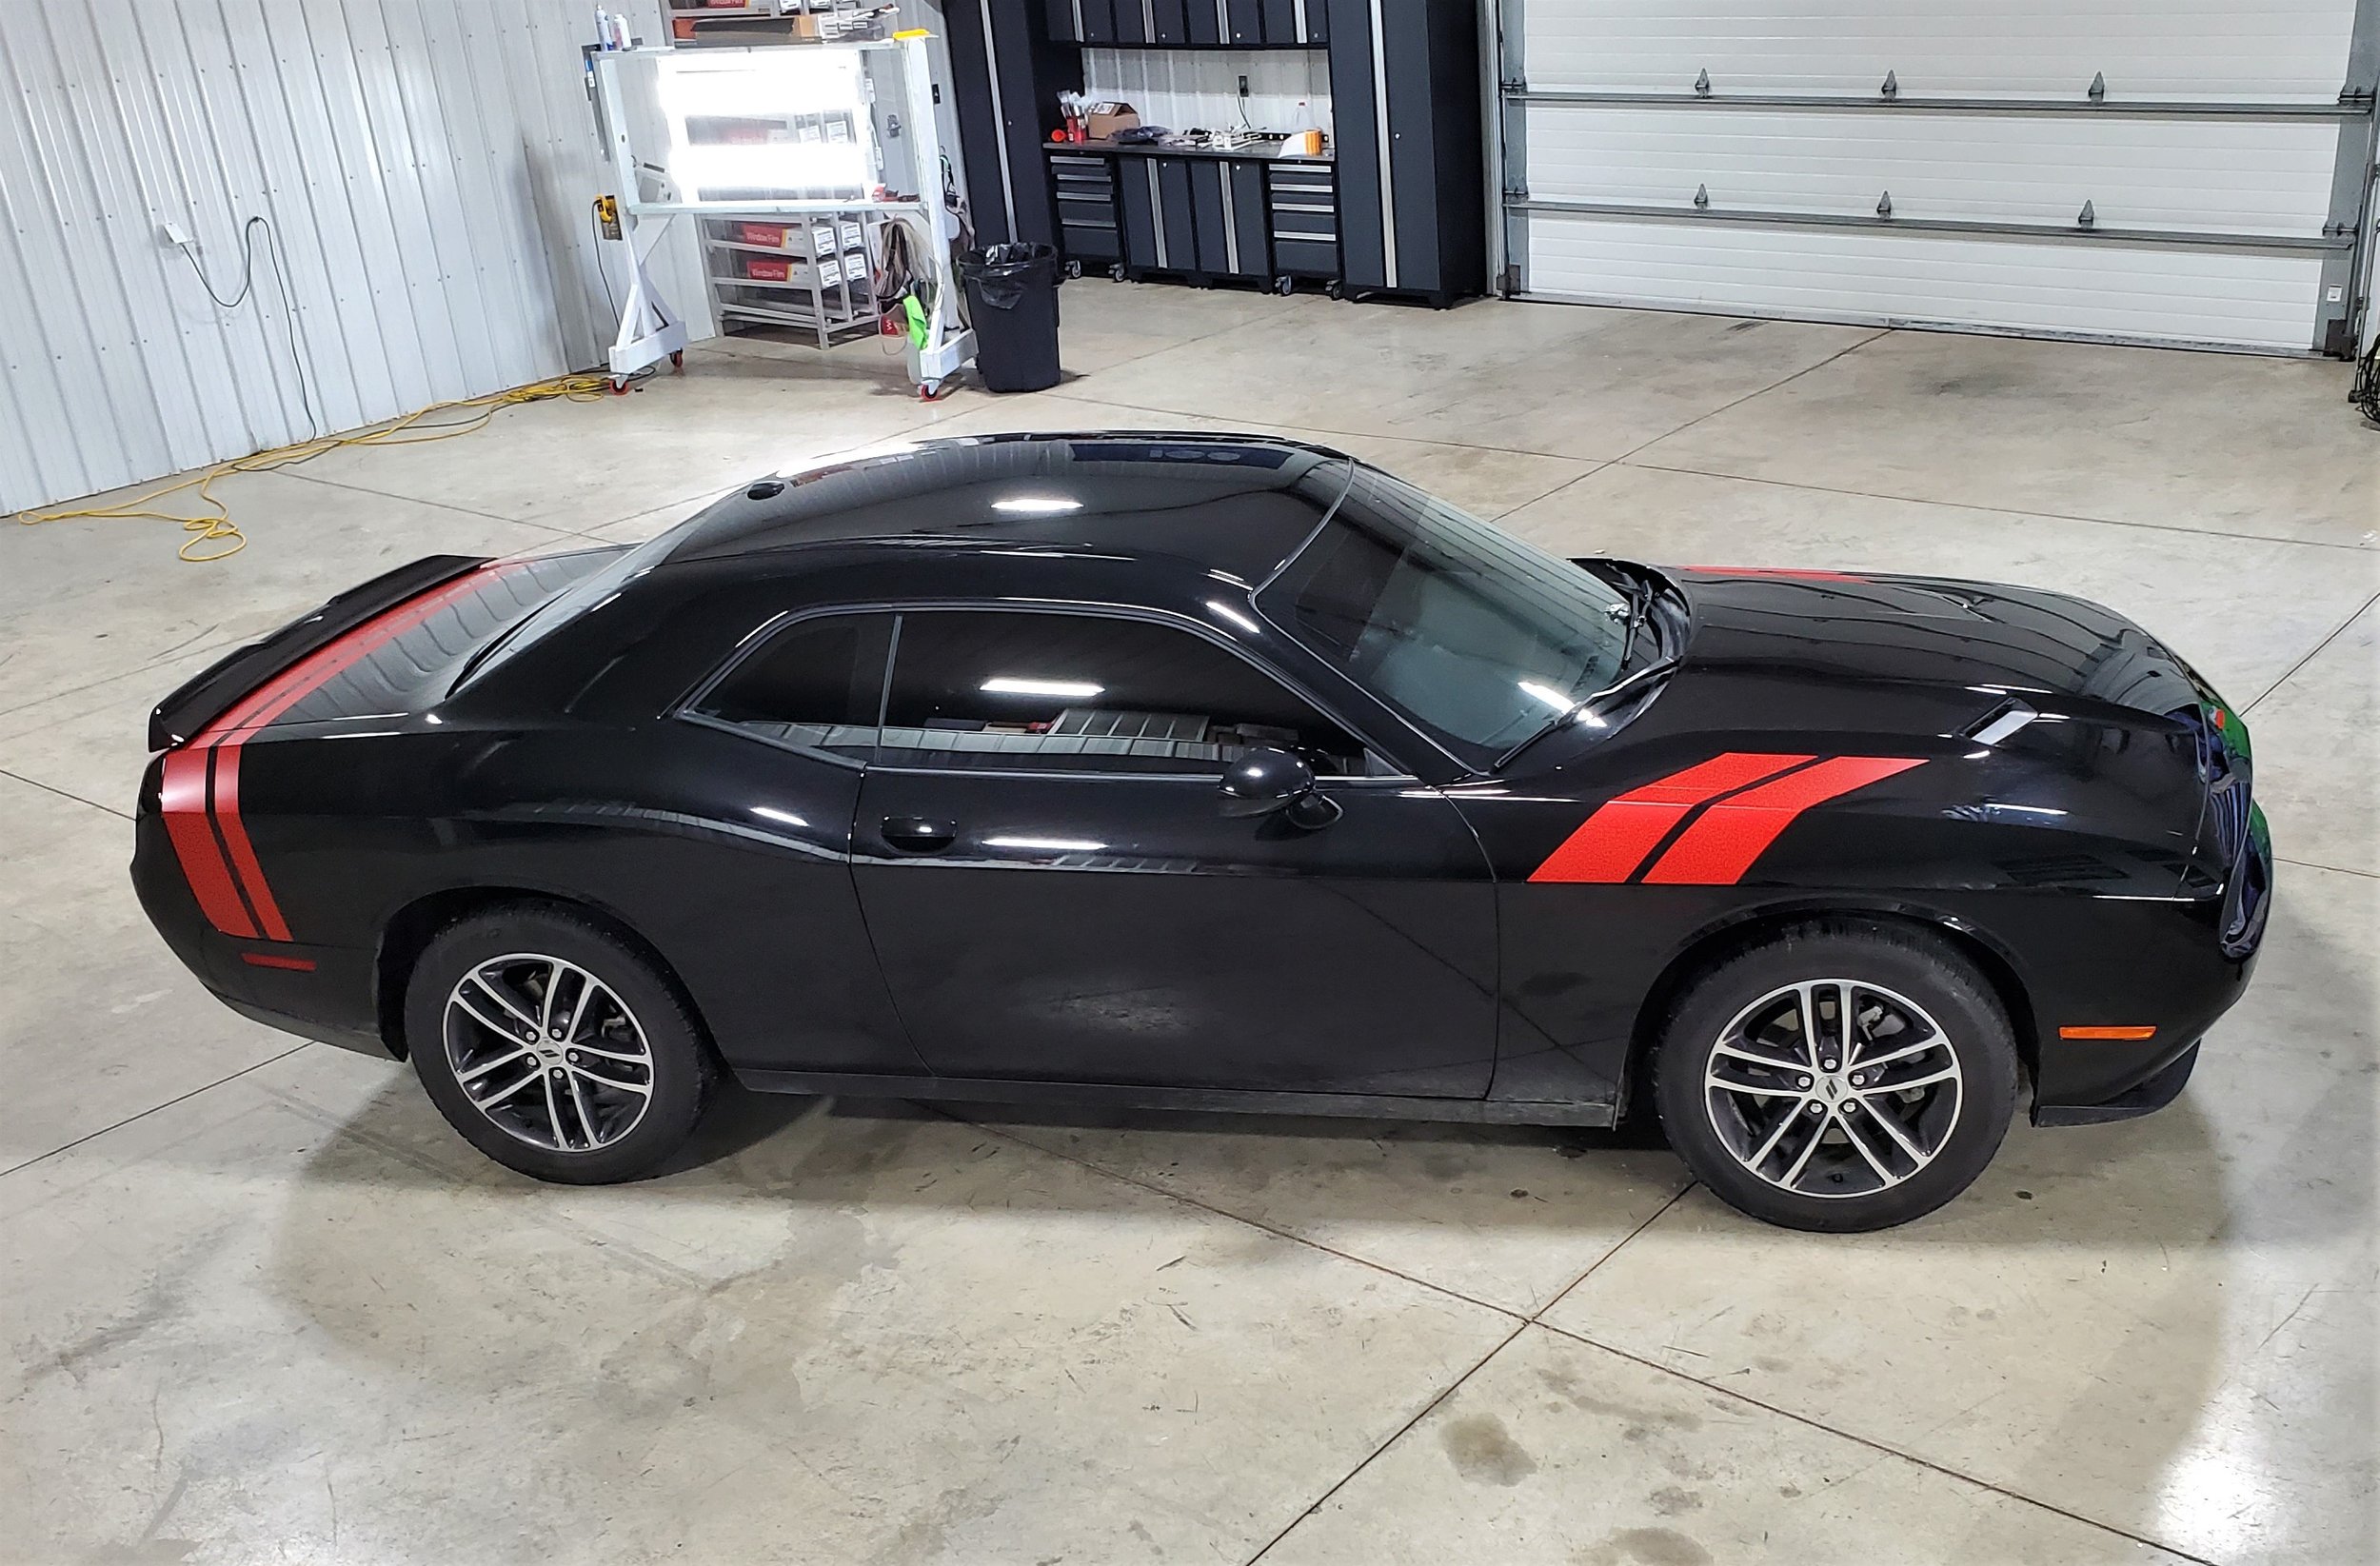 2019 Dodge Challenger Custom trunk stripes and fender hashes